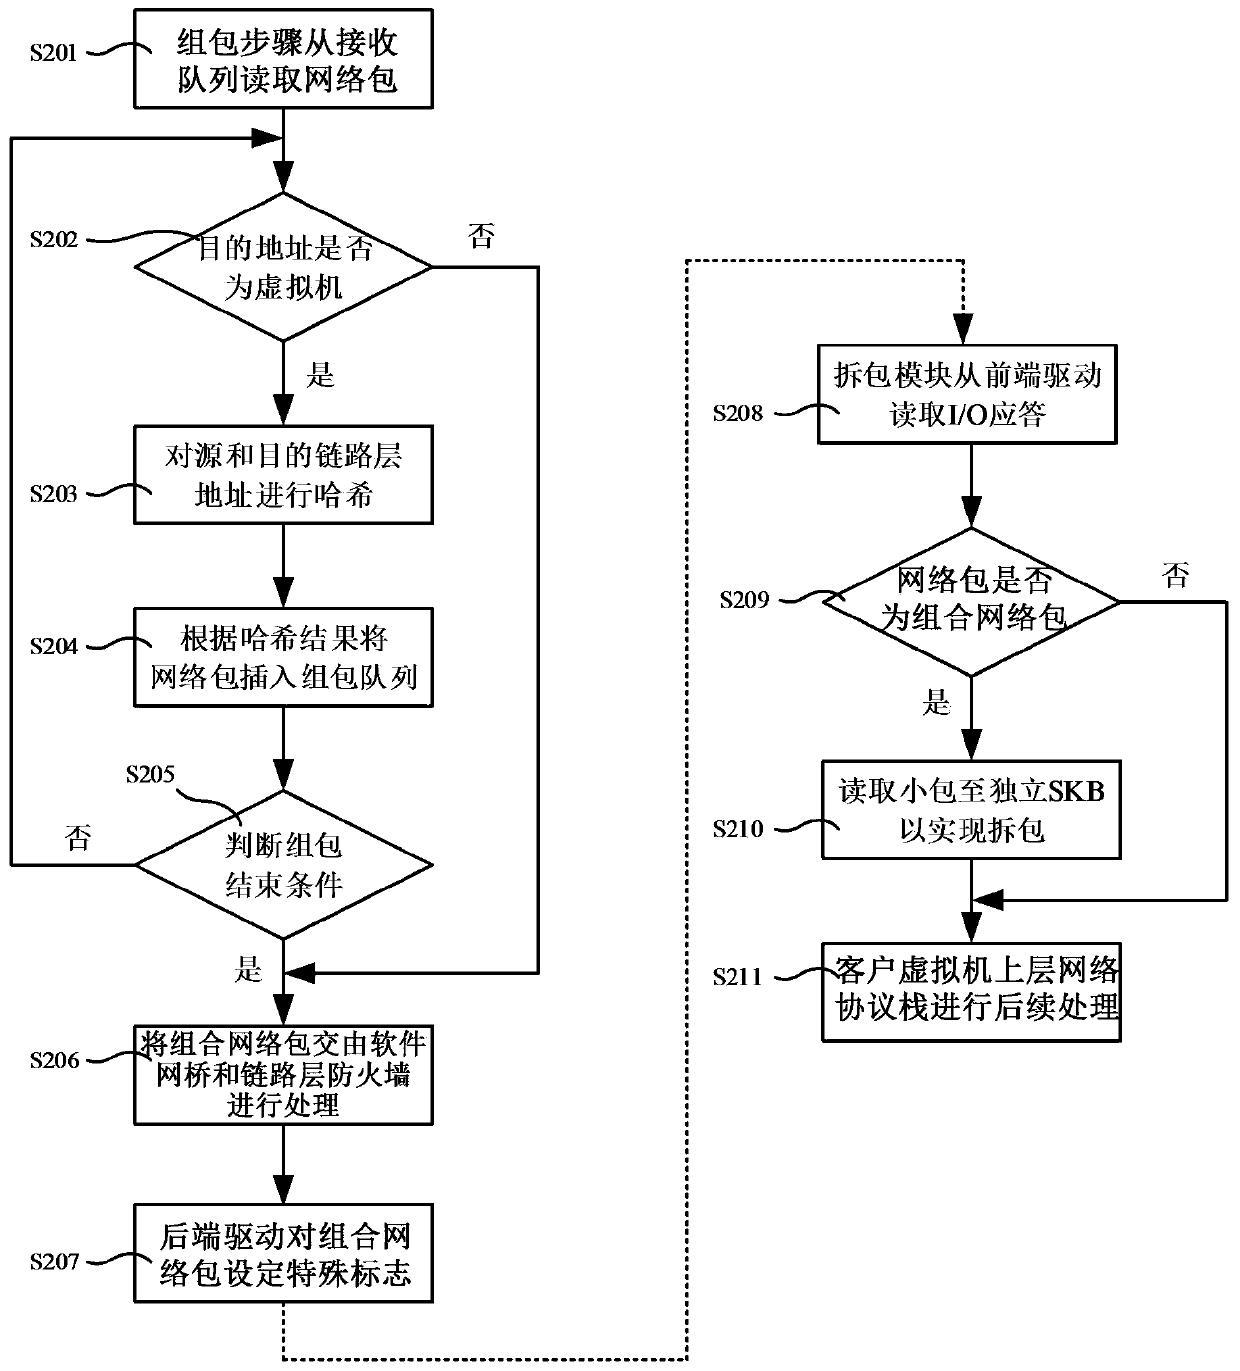 Virtual network optimization method and system